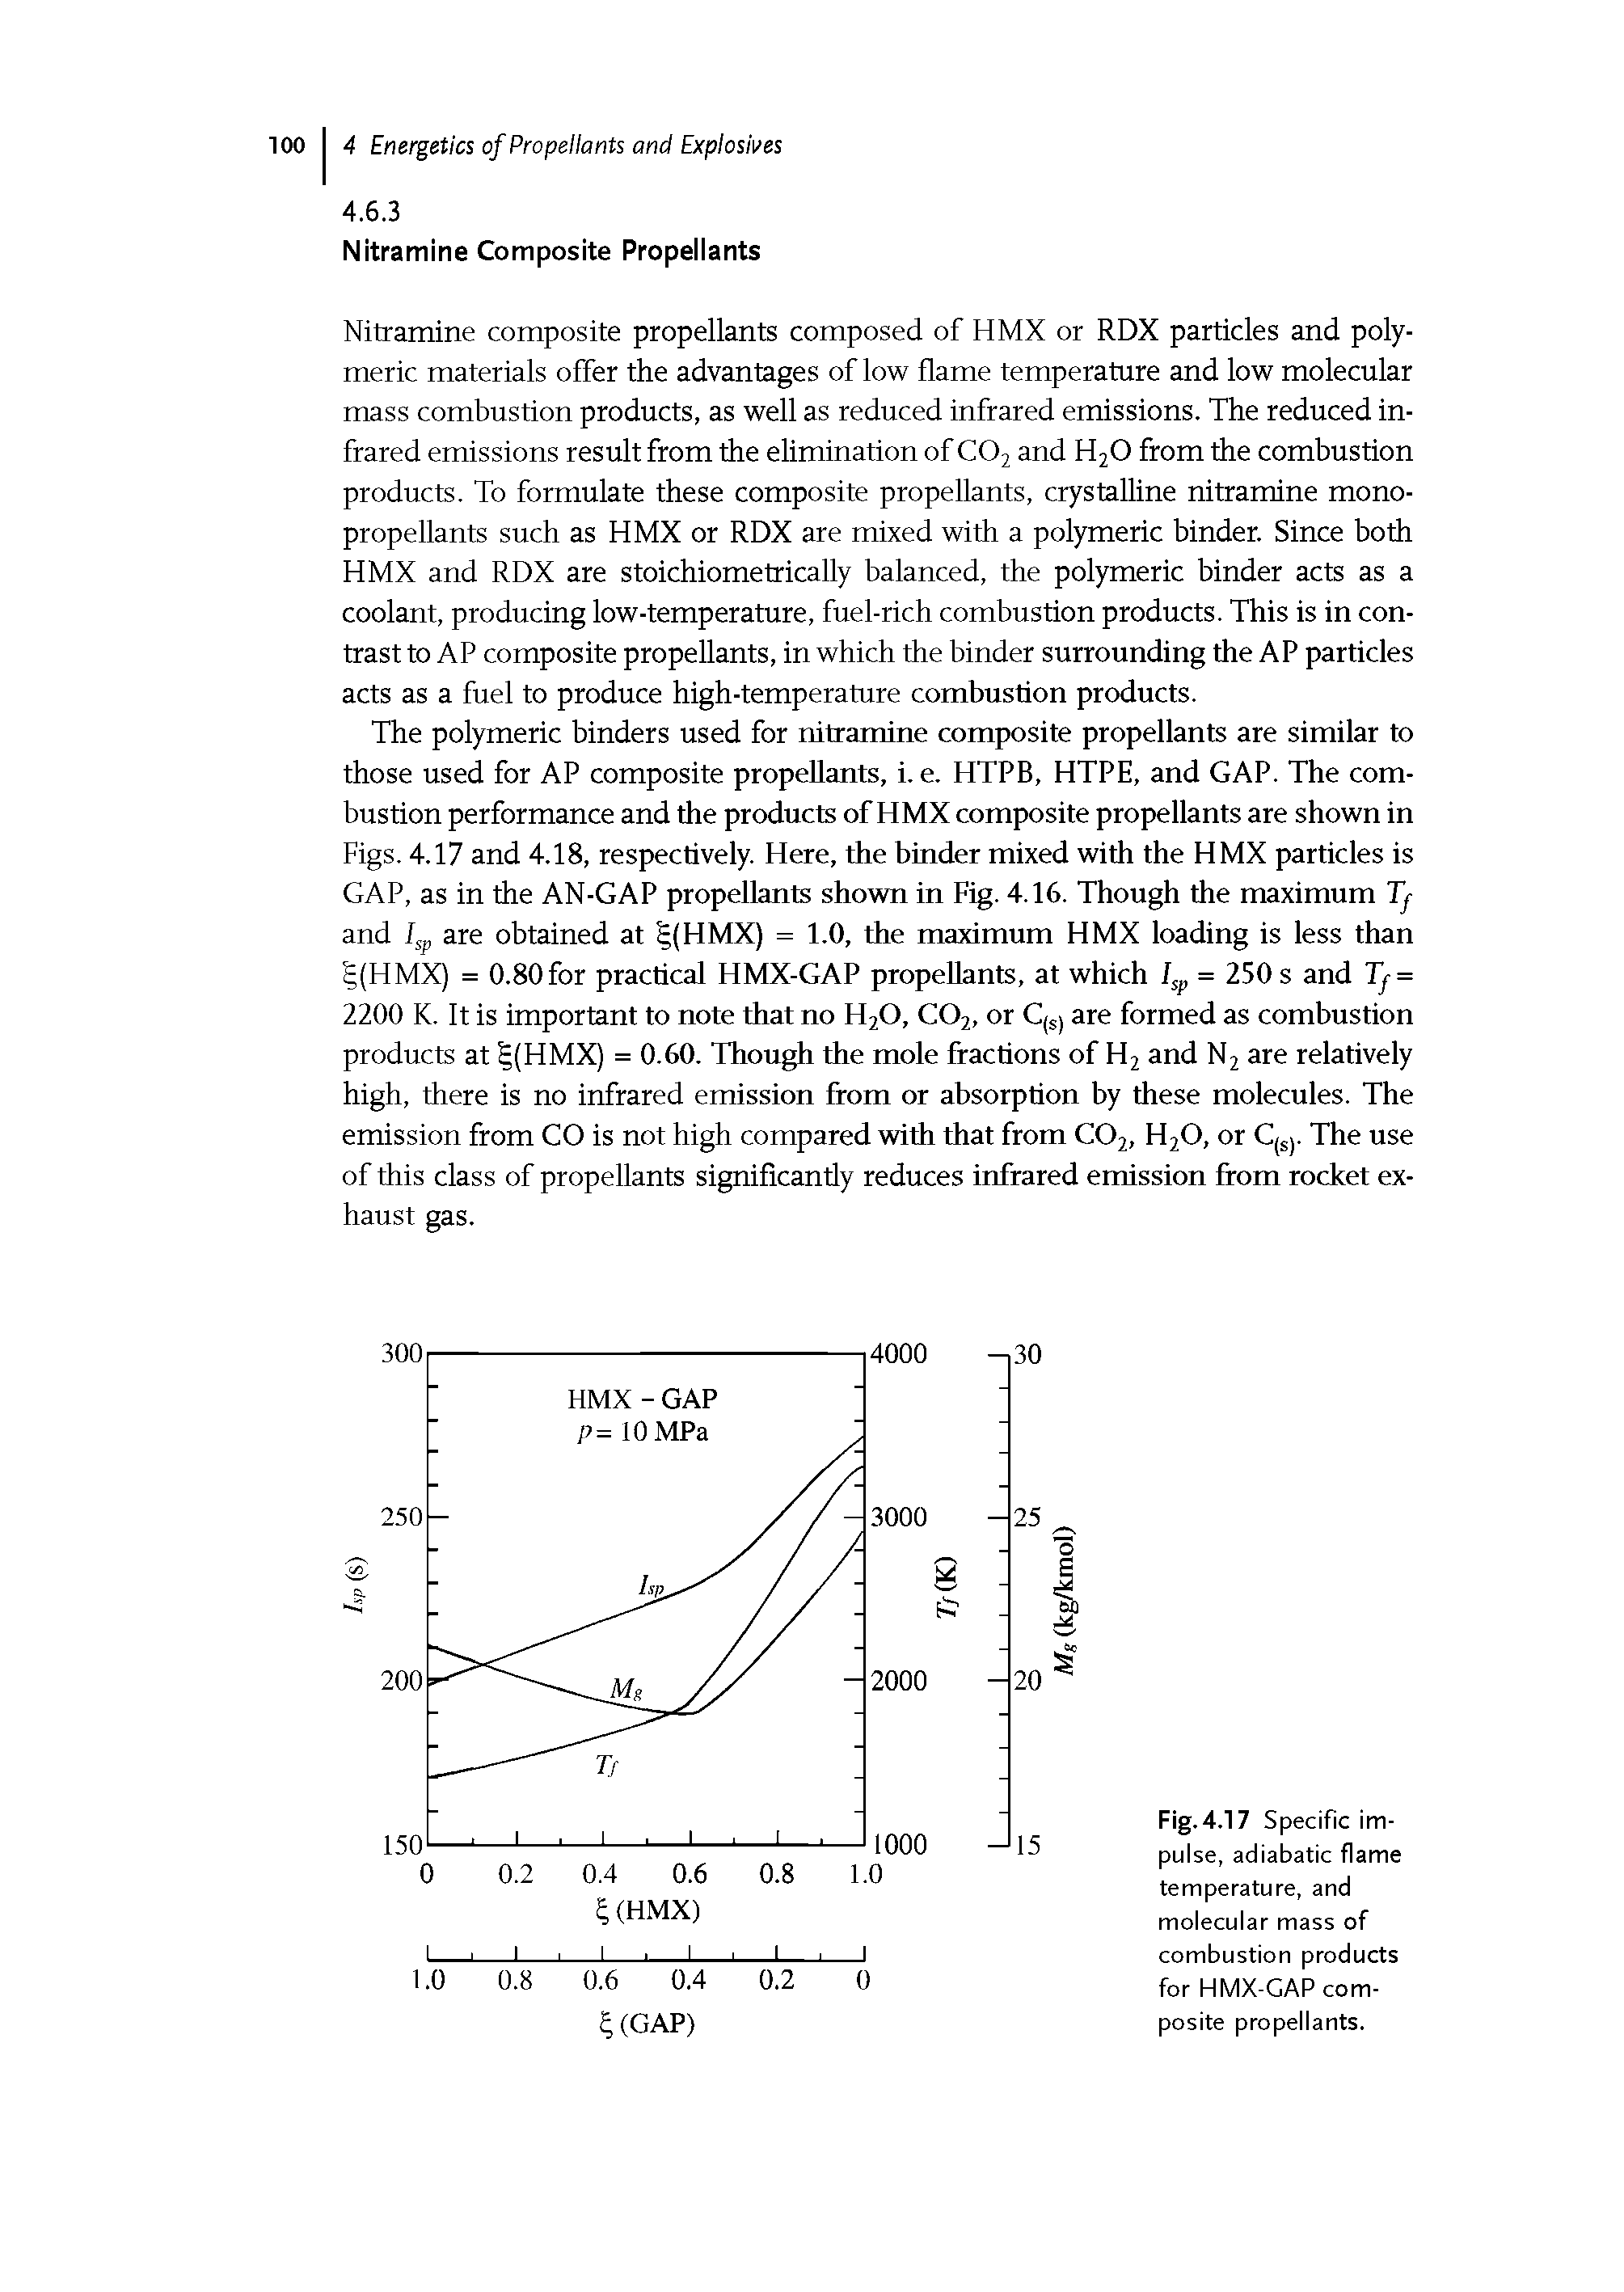 Fig.4.17 Specific impulse, adiabatic flame temperature, and molecular mass of combustion products for HMX-GAP composite propellants.